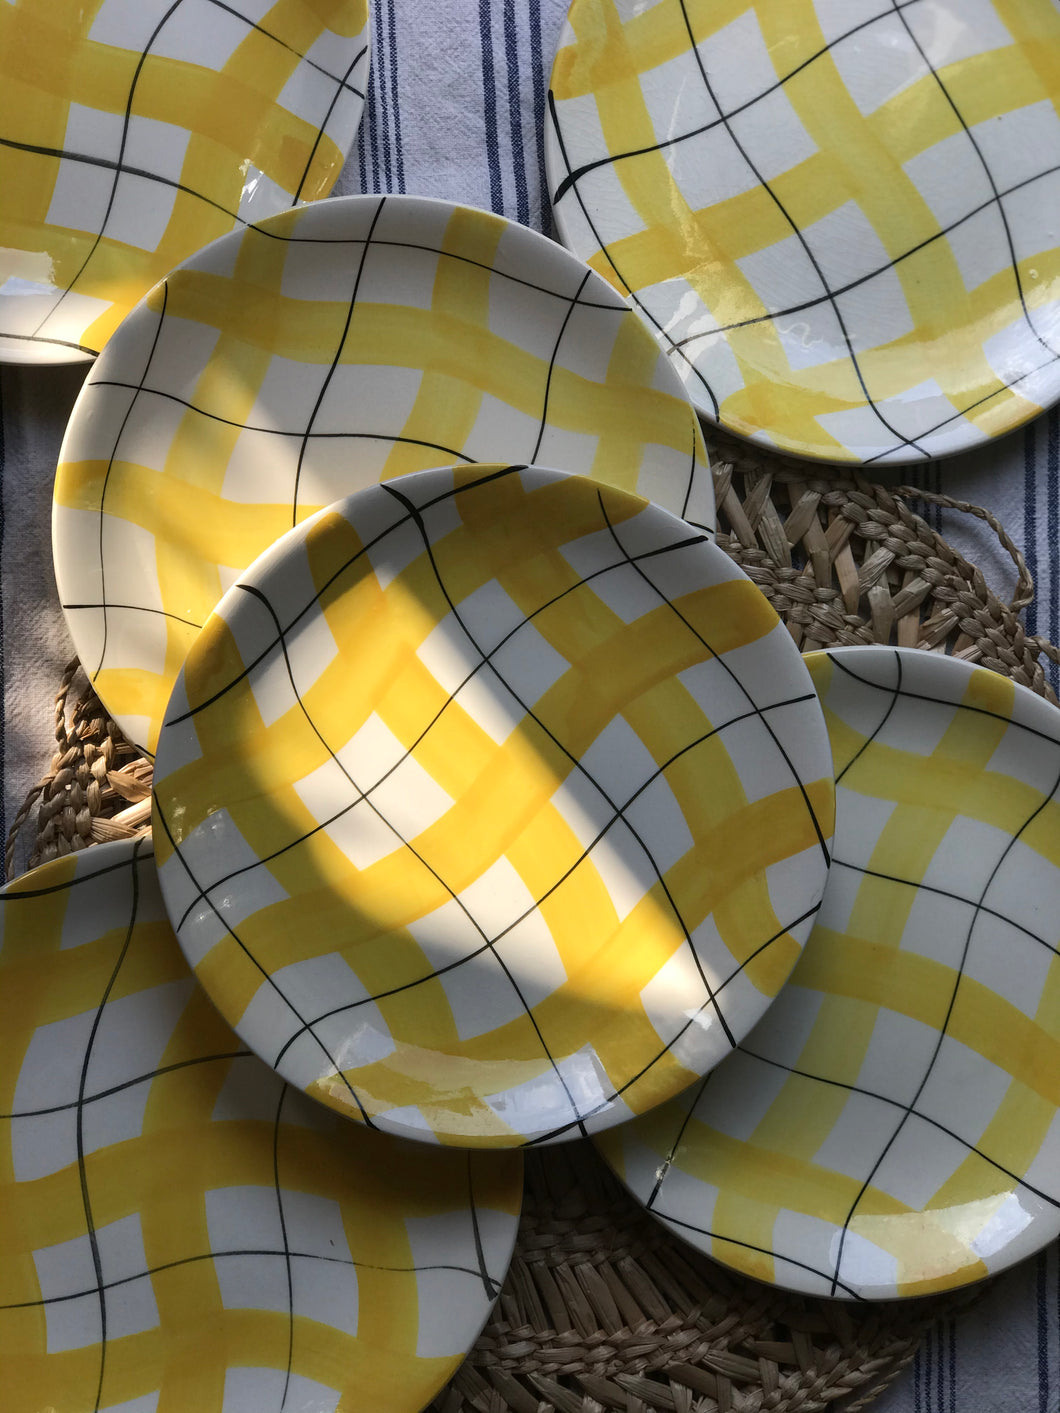 Yellow Check Dinner Plates